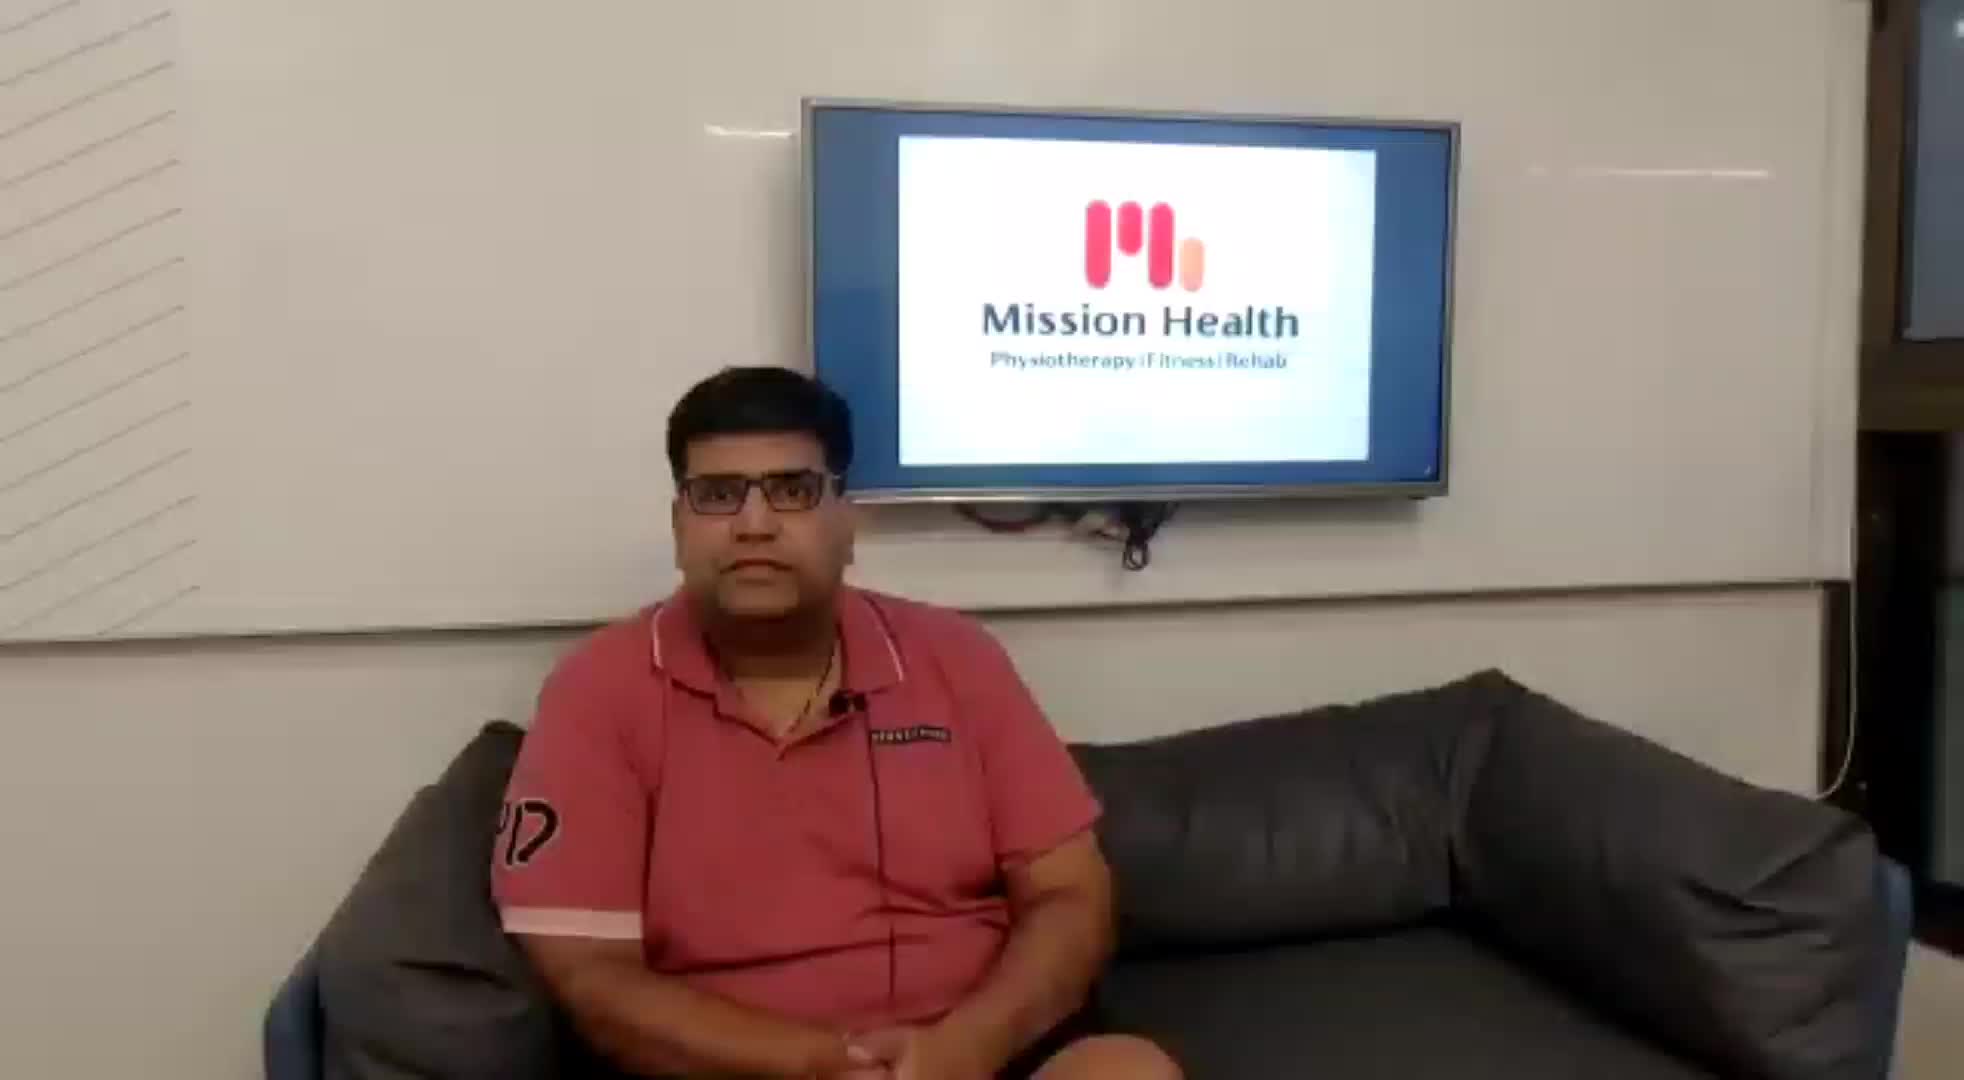 #backtonormal..
#postsrokerecovery

Recovery from Stroke is possible and today we have Mr. Prashant Mittal who has shared  his experience and his journey of recovery post stroke with Mission Health.. 

His regained independence has made him lead a normal life again..

His trust and faith in us is what keeps us motivated to give our best..

+91 63562 63562
www.missionhealth.co.in

#bestrobotics 
#bestvideooftheday❤️ 
#bestneurorehab 
#abilitynotdisability 
#abilityclinic 
#missionhealthfamily 
#MissionHealth 
#missionhealthindia 
#strokerecovery